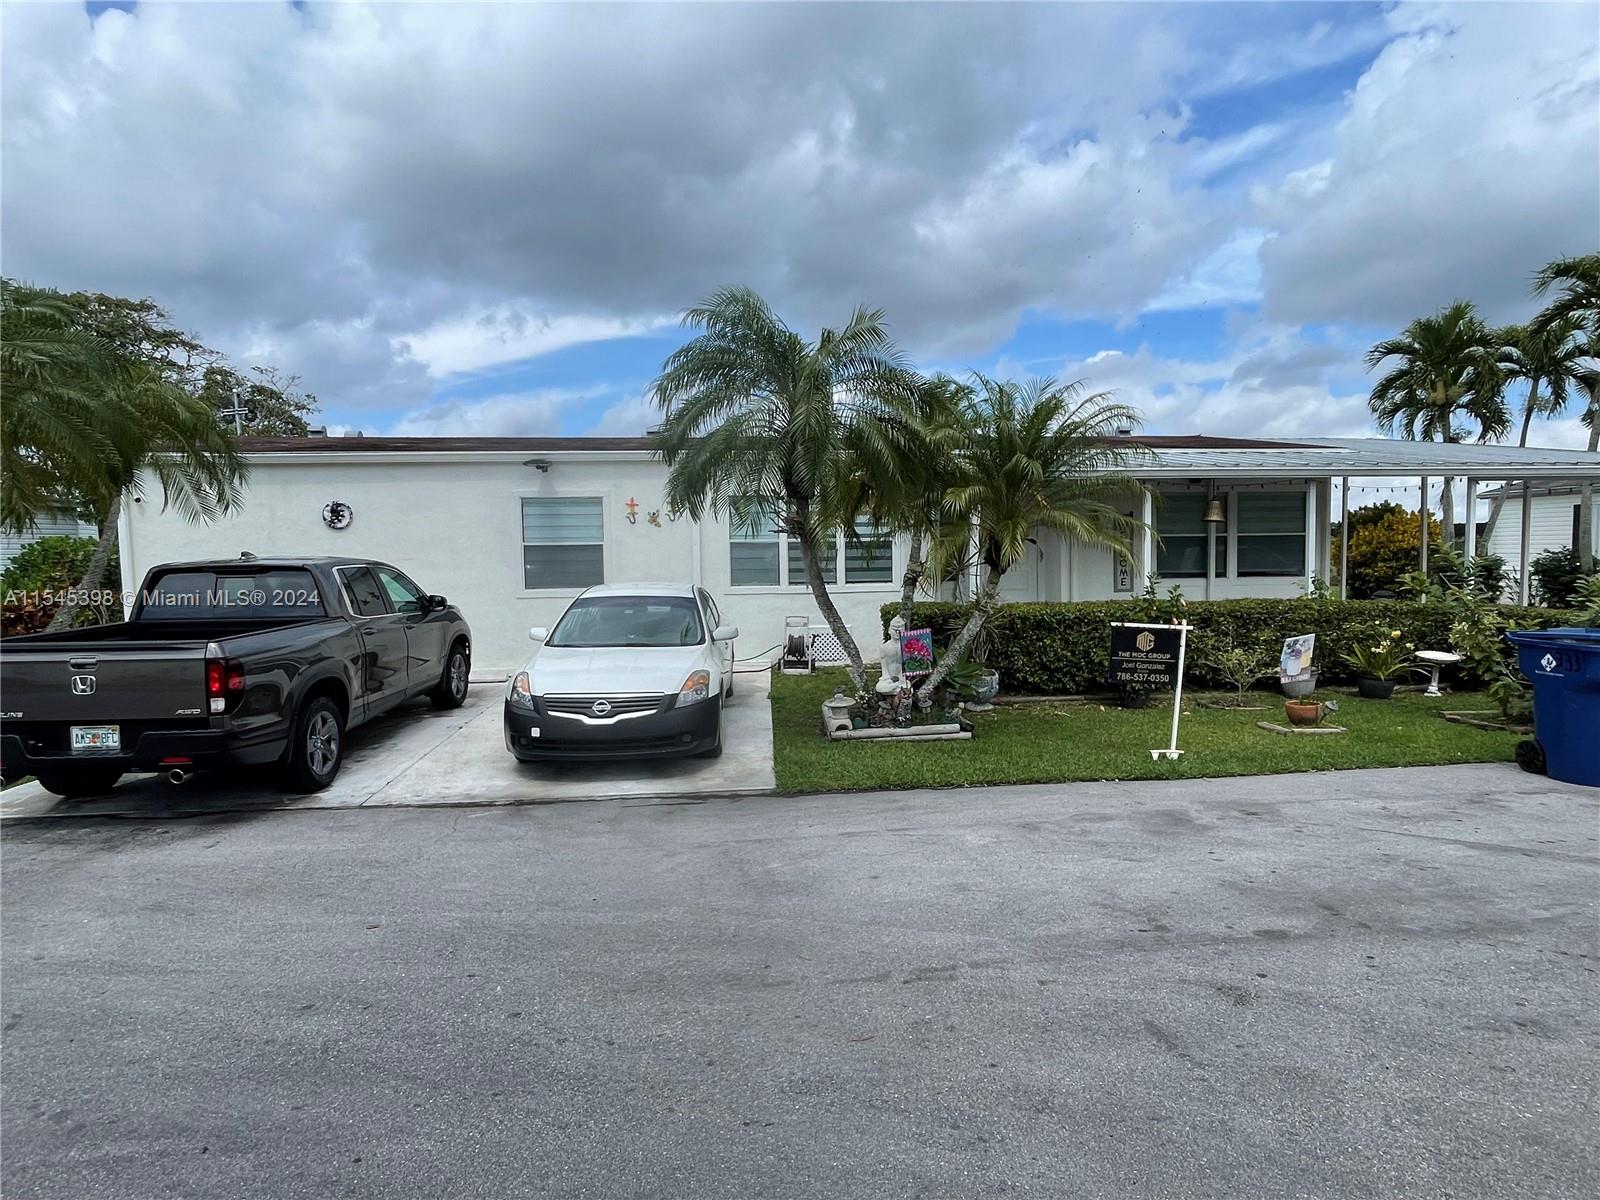 Property for Sale at 19800 Sw 180th Ave Unit 333 Ave, Miami, Broward County, Florida - Bedrooms: 3 
Bathrooms: 2  - $310,000